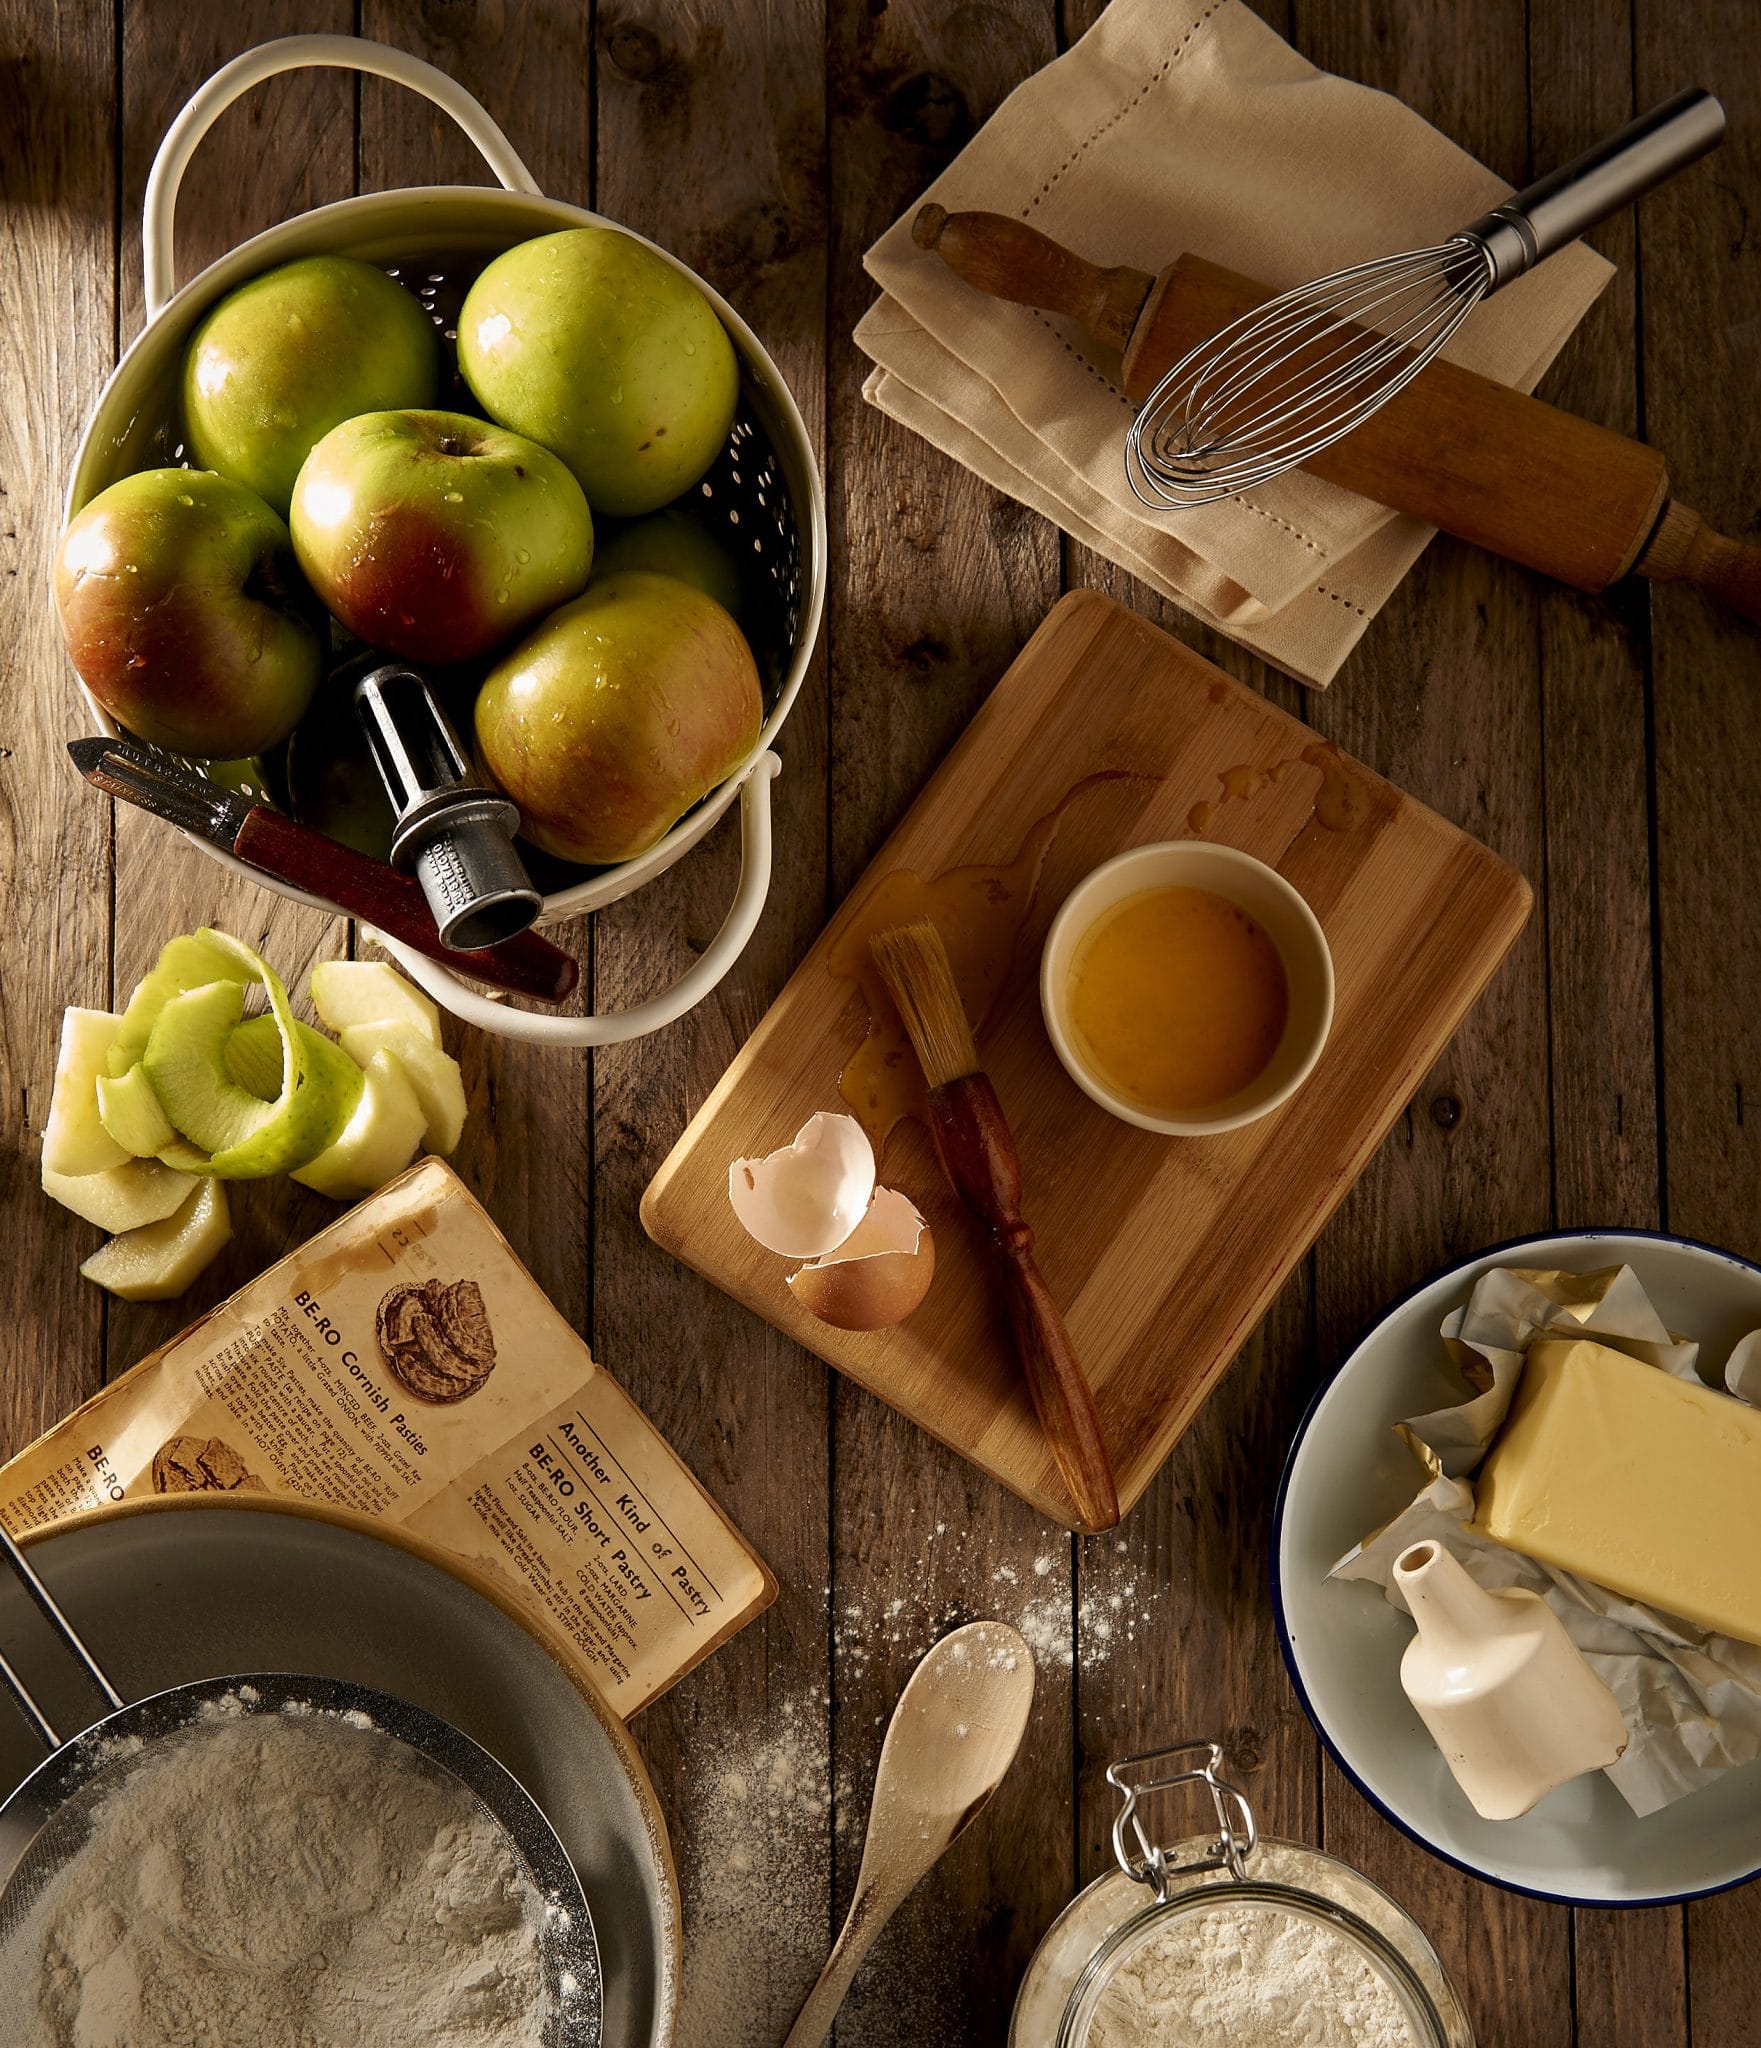 All the ingredients needed to make apple pie surrounding a wooden board.